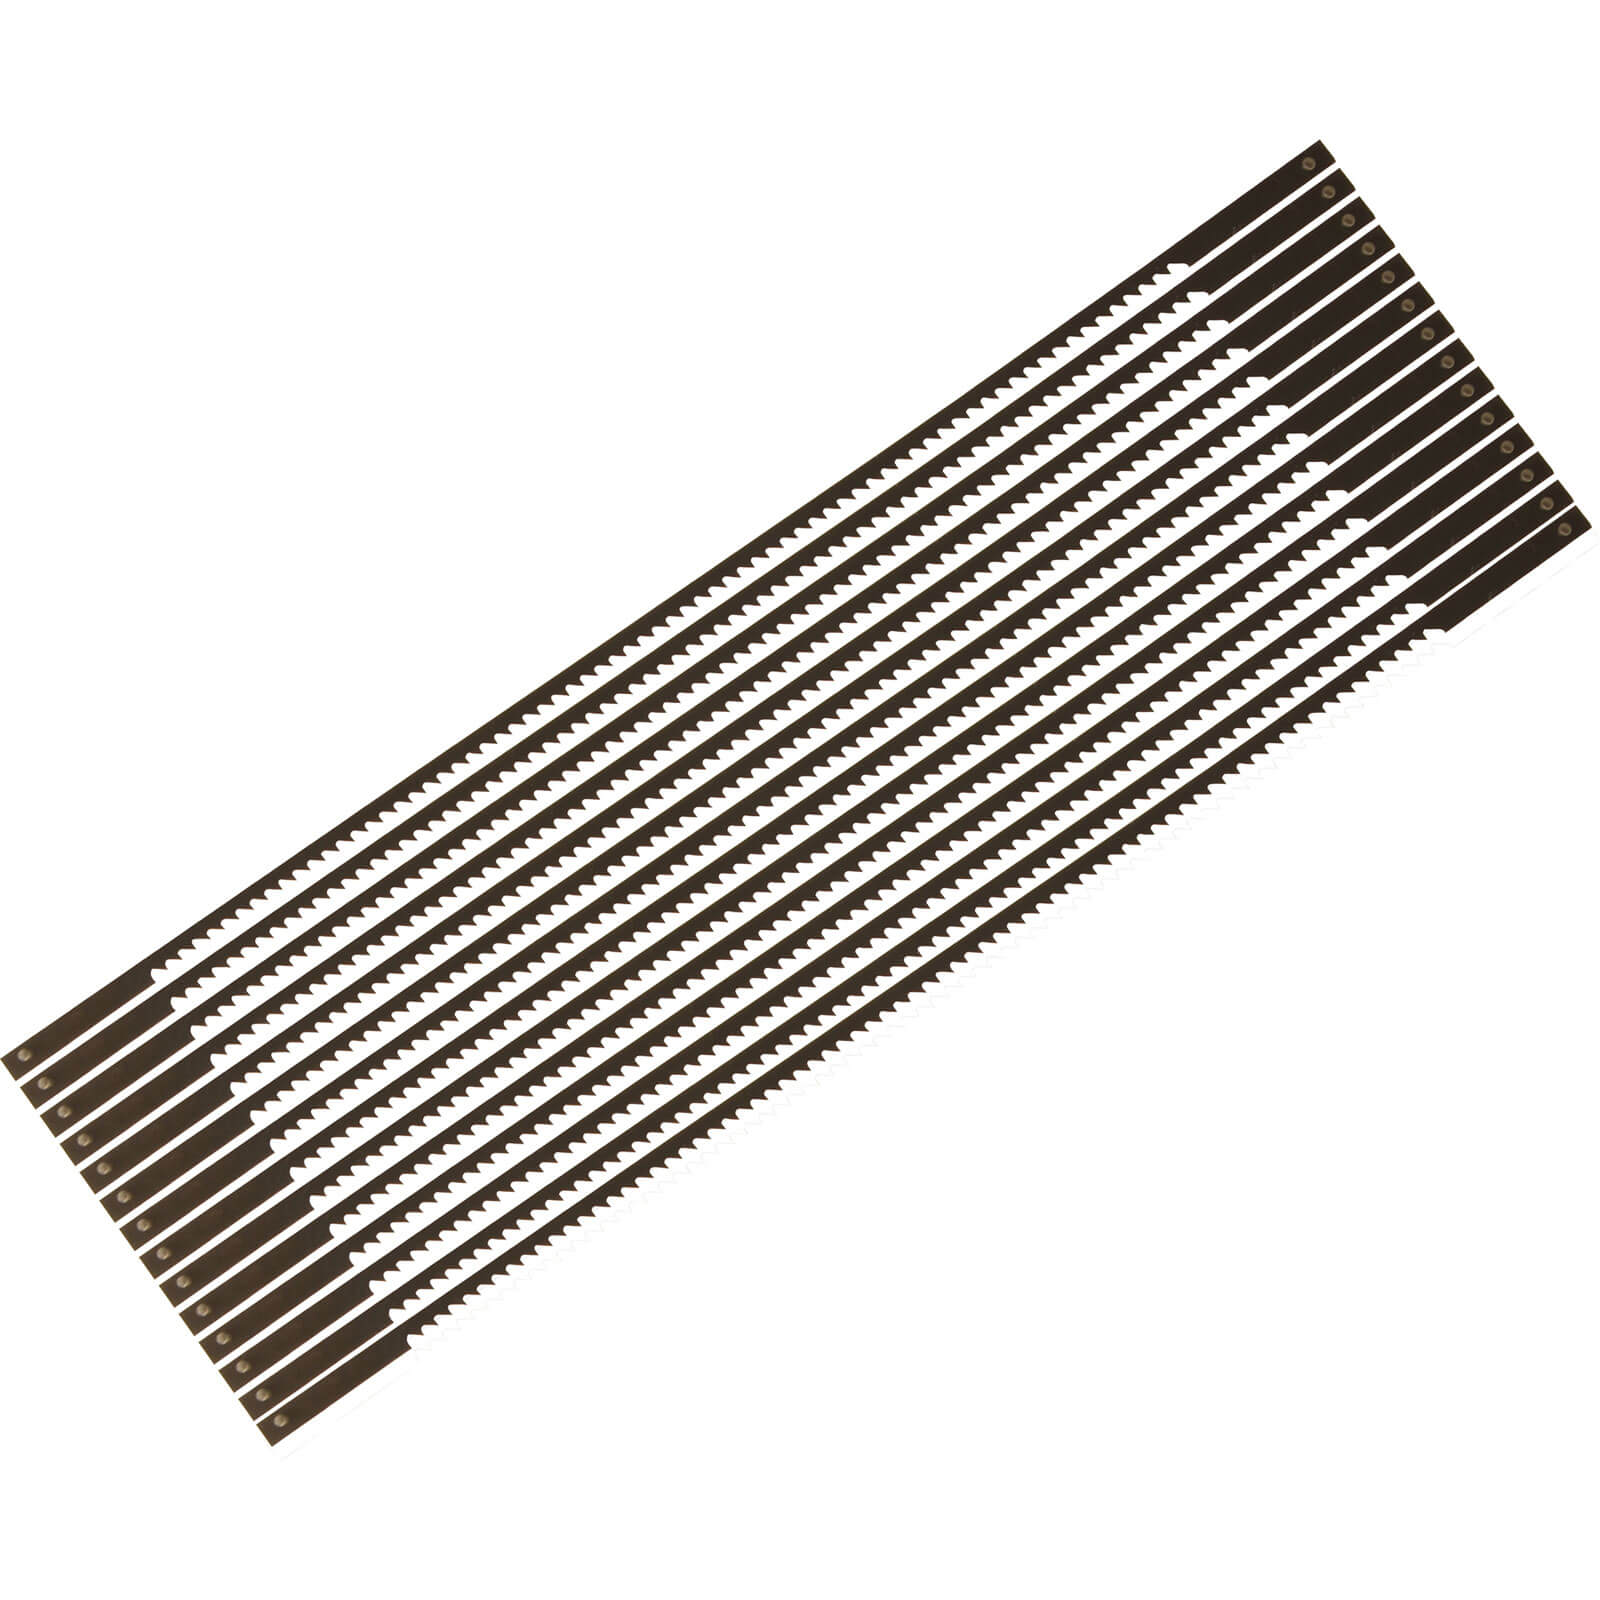 Image of Faithfull Coping Saw Blades Pack of 100